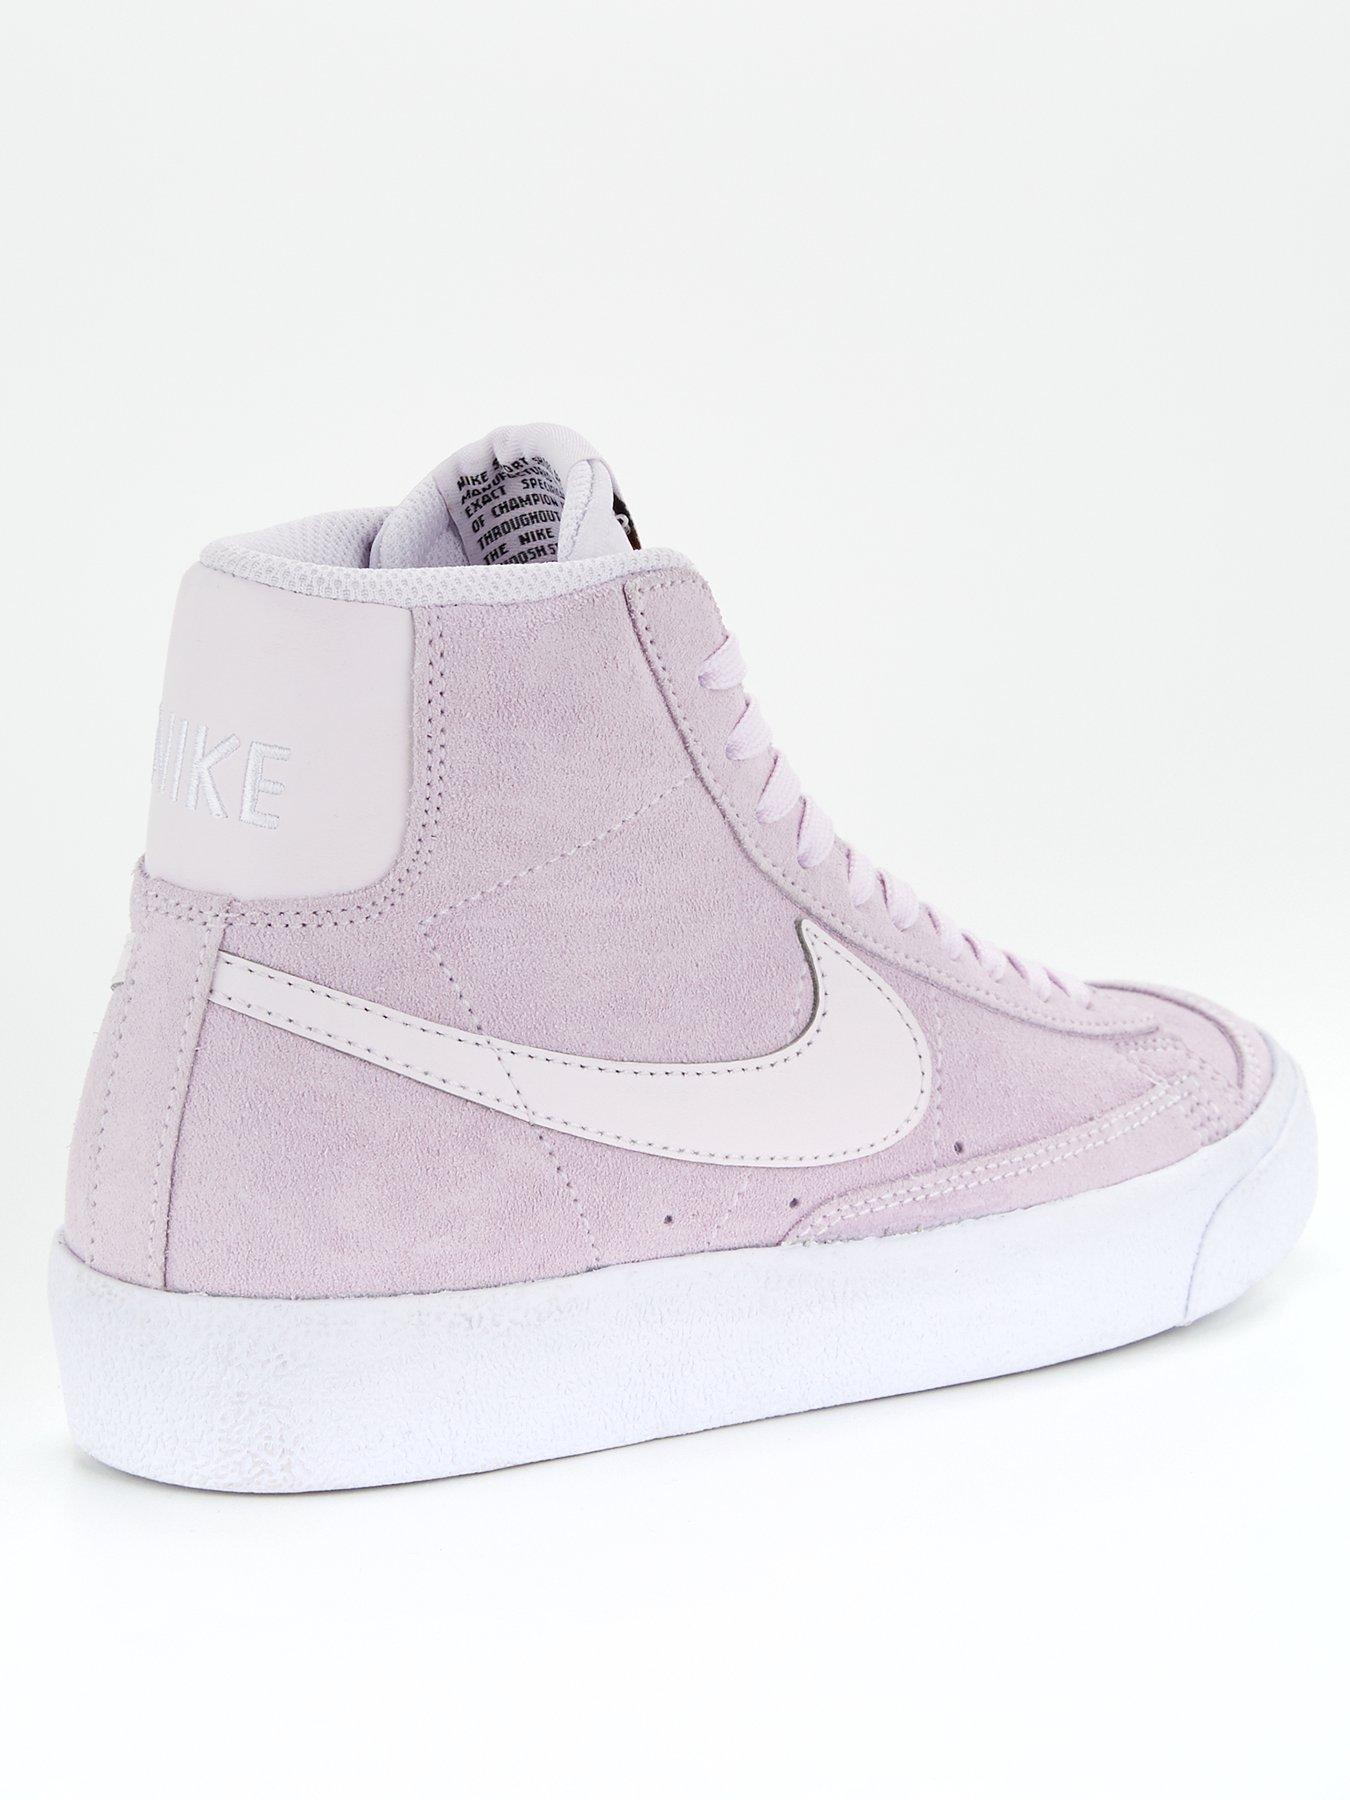 Nike Blazer Mid 77 Suede Junior Trainers - Violet | very.co.uk